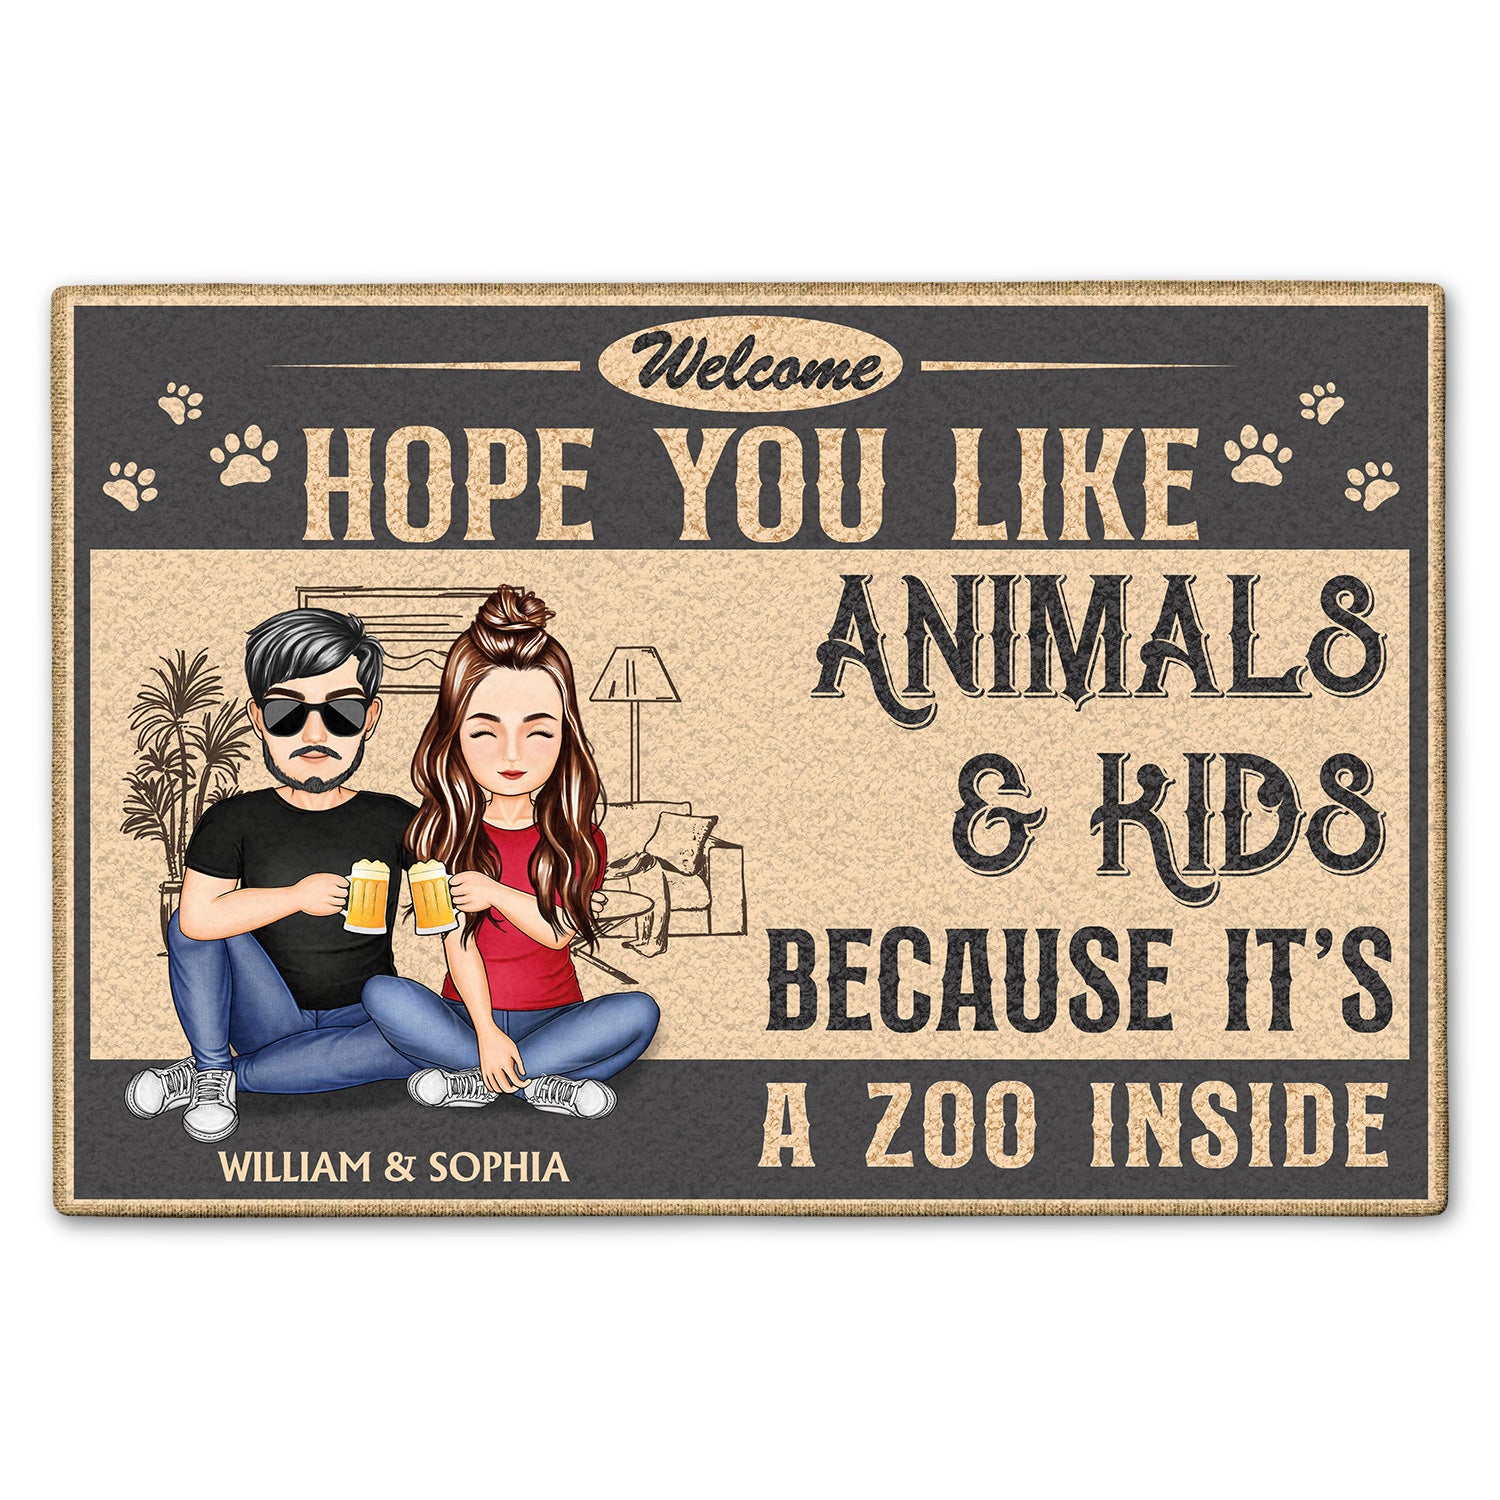 Family Hope You Like Animals And Kids - Anniversary, Birthday, Home Decor Gift For Husband, Wife, Couple - Personalized Custom Doormat